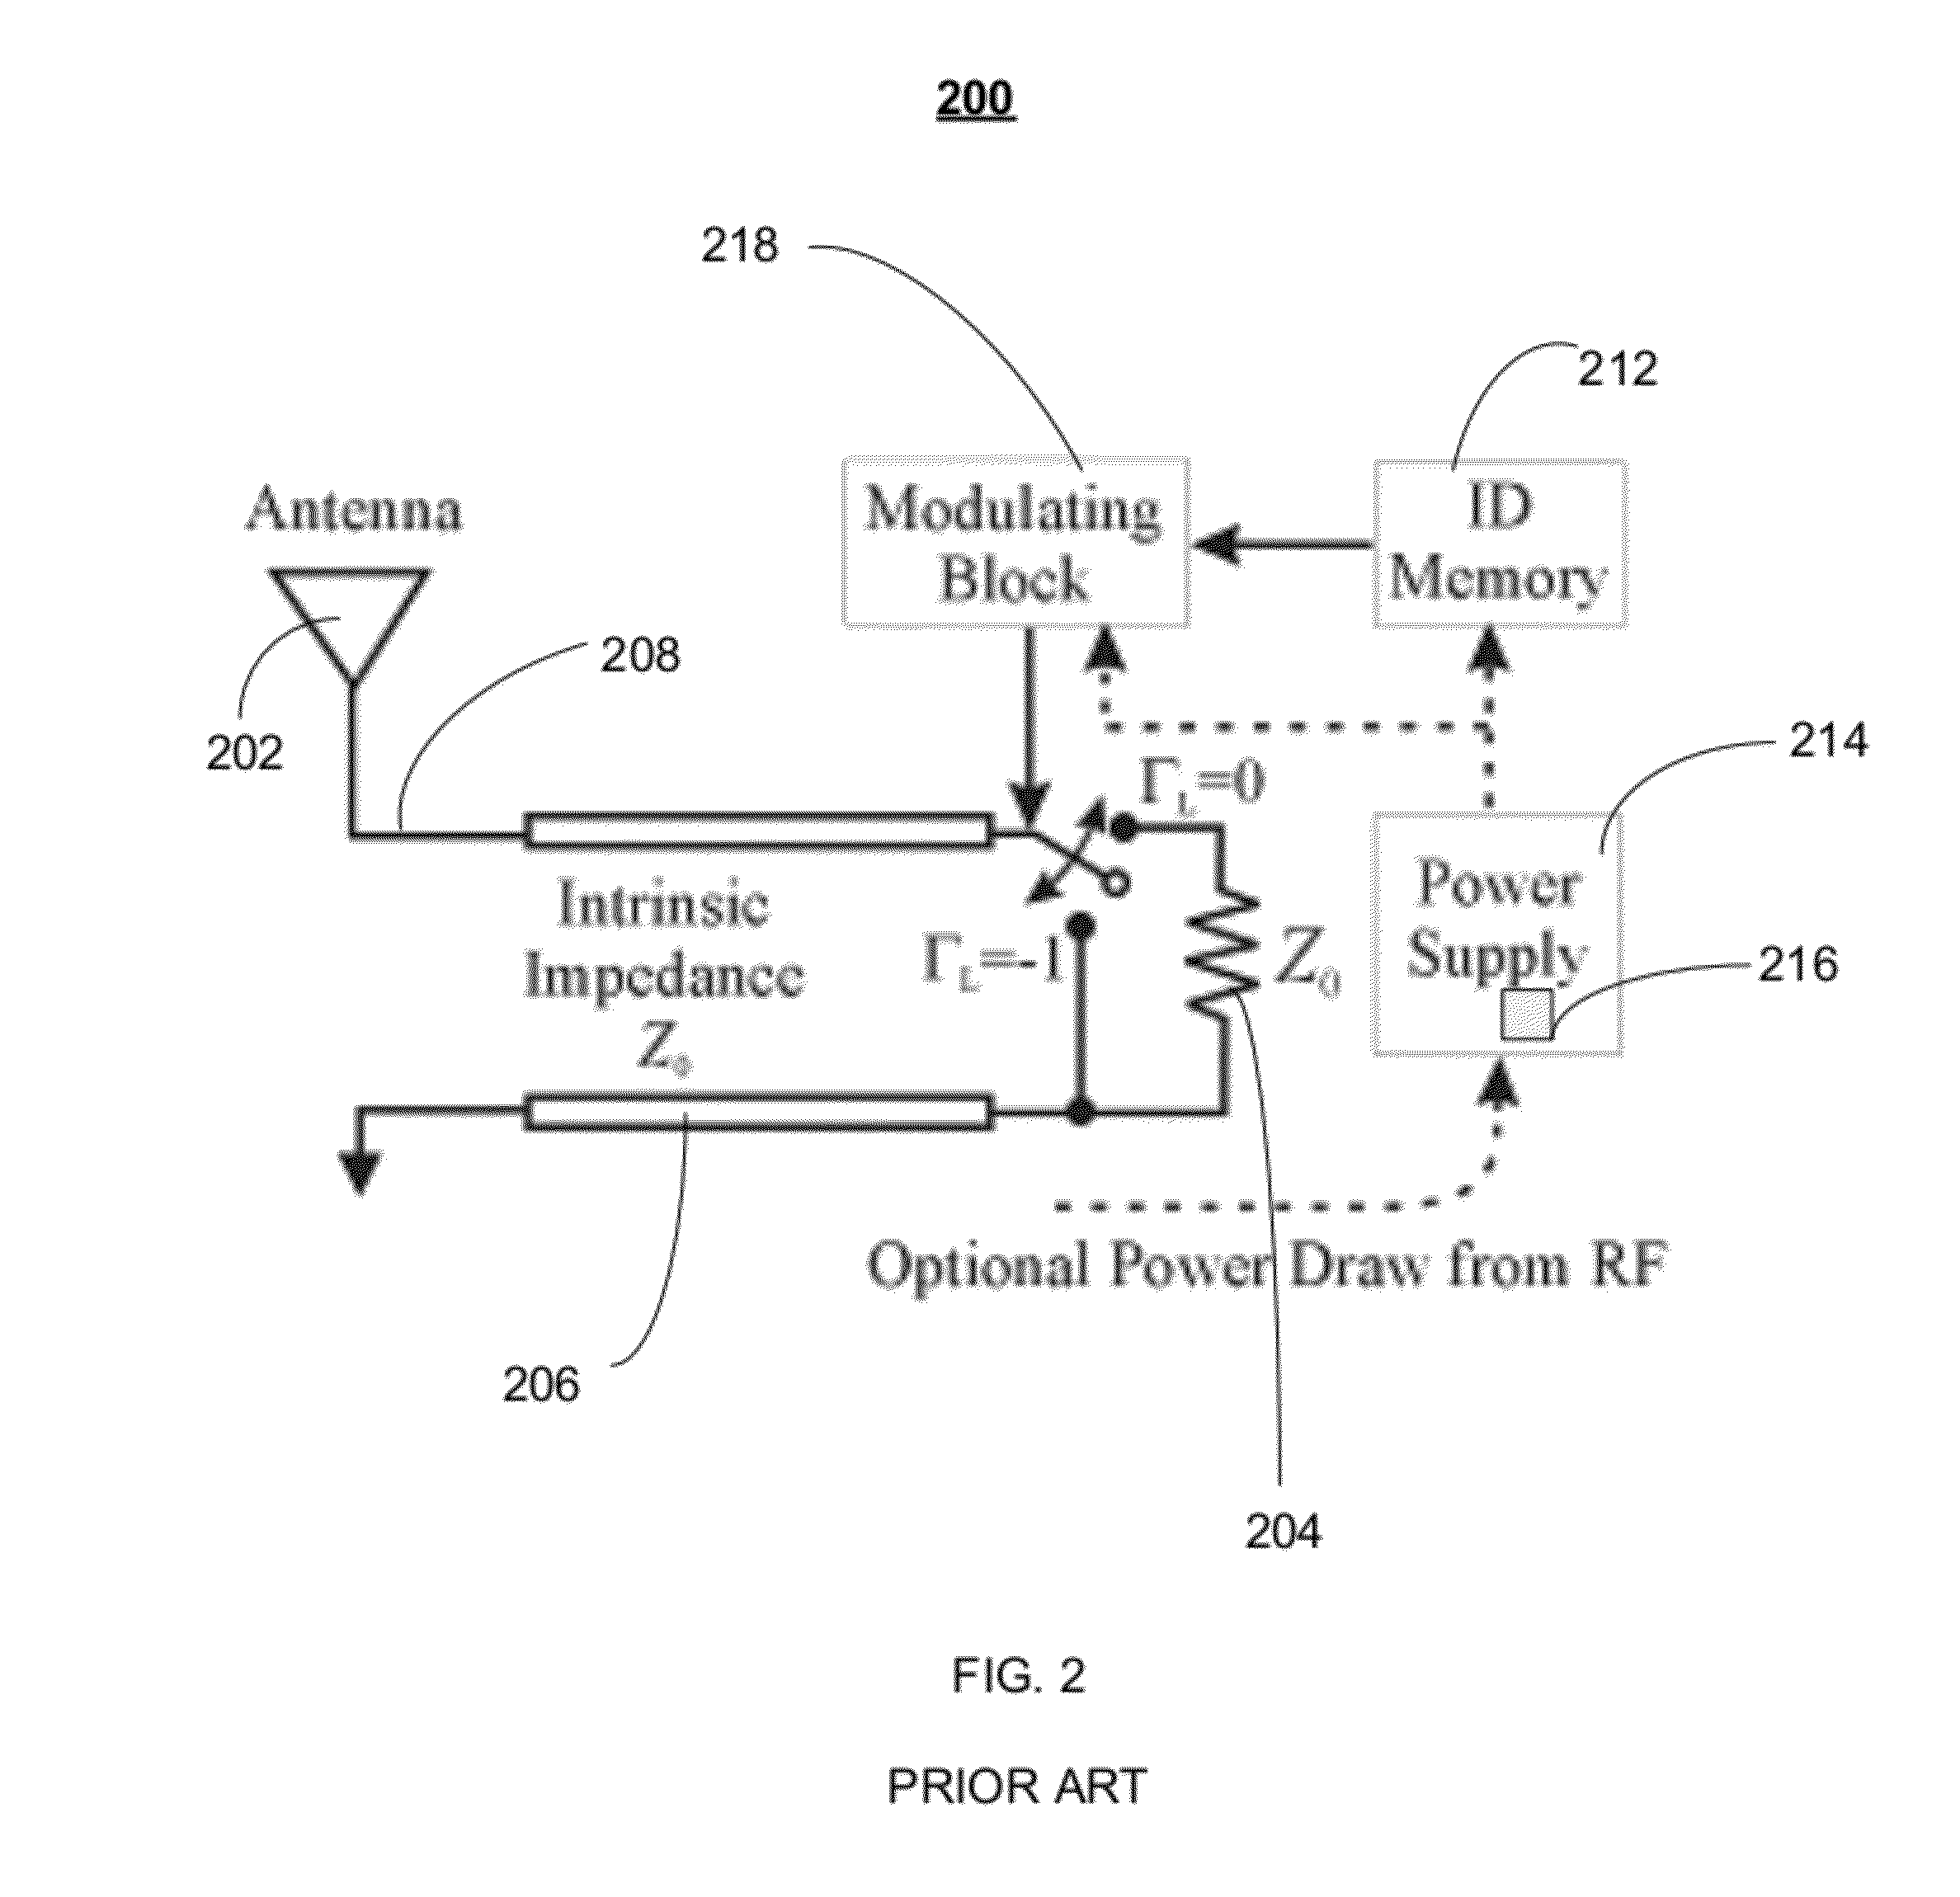 Multi-antenna signaling scheme for low-powered or passive radio communications